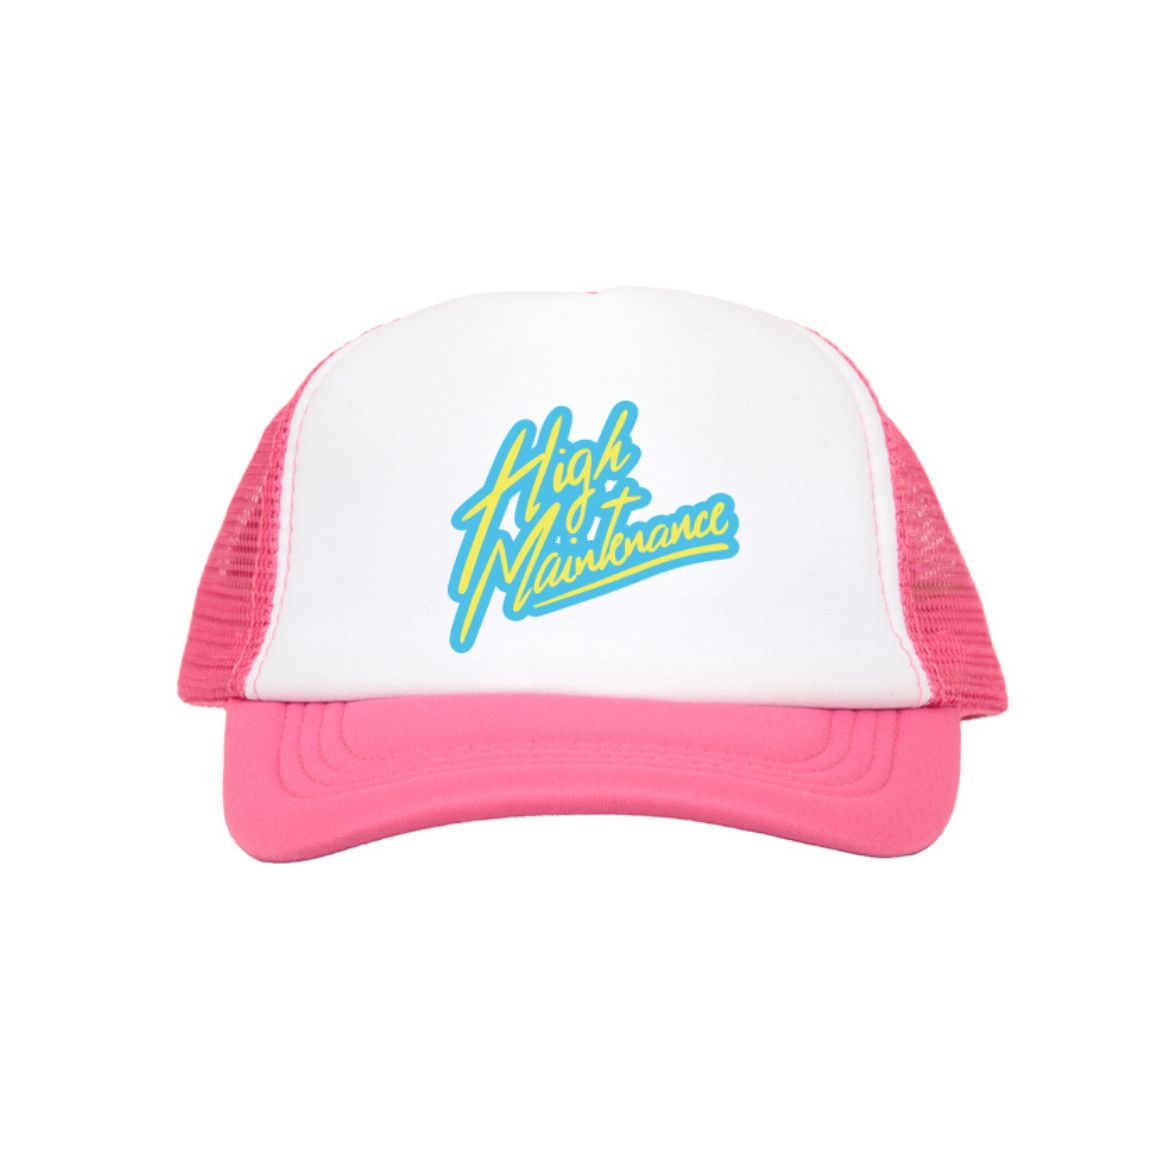 High Maintenance on Hot Pink Youth Trucker Cap 90s Throw Back